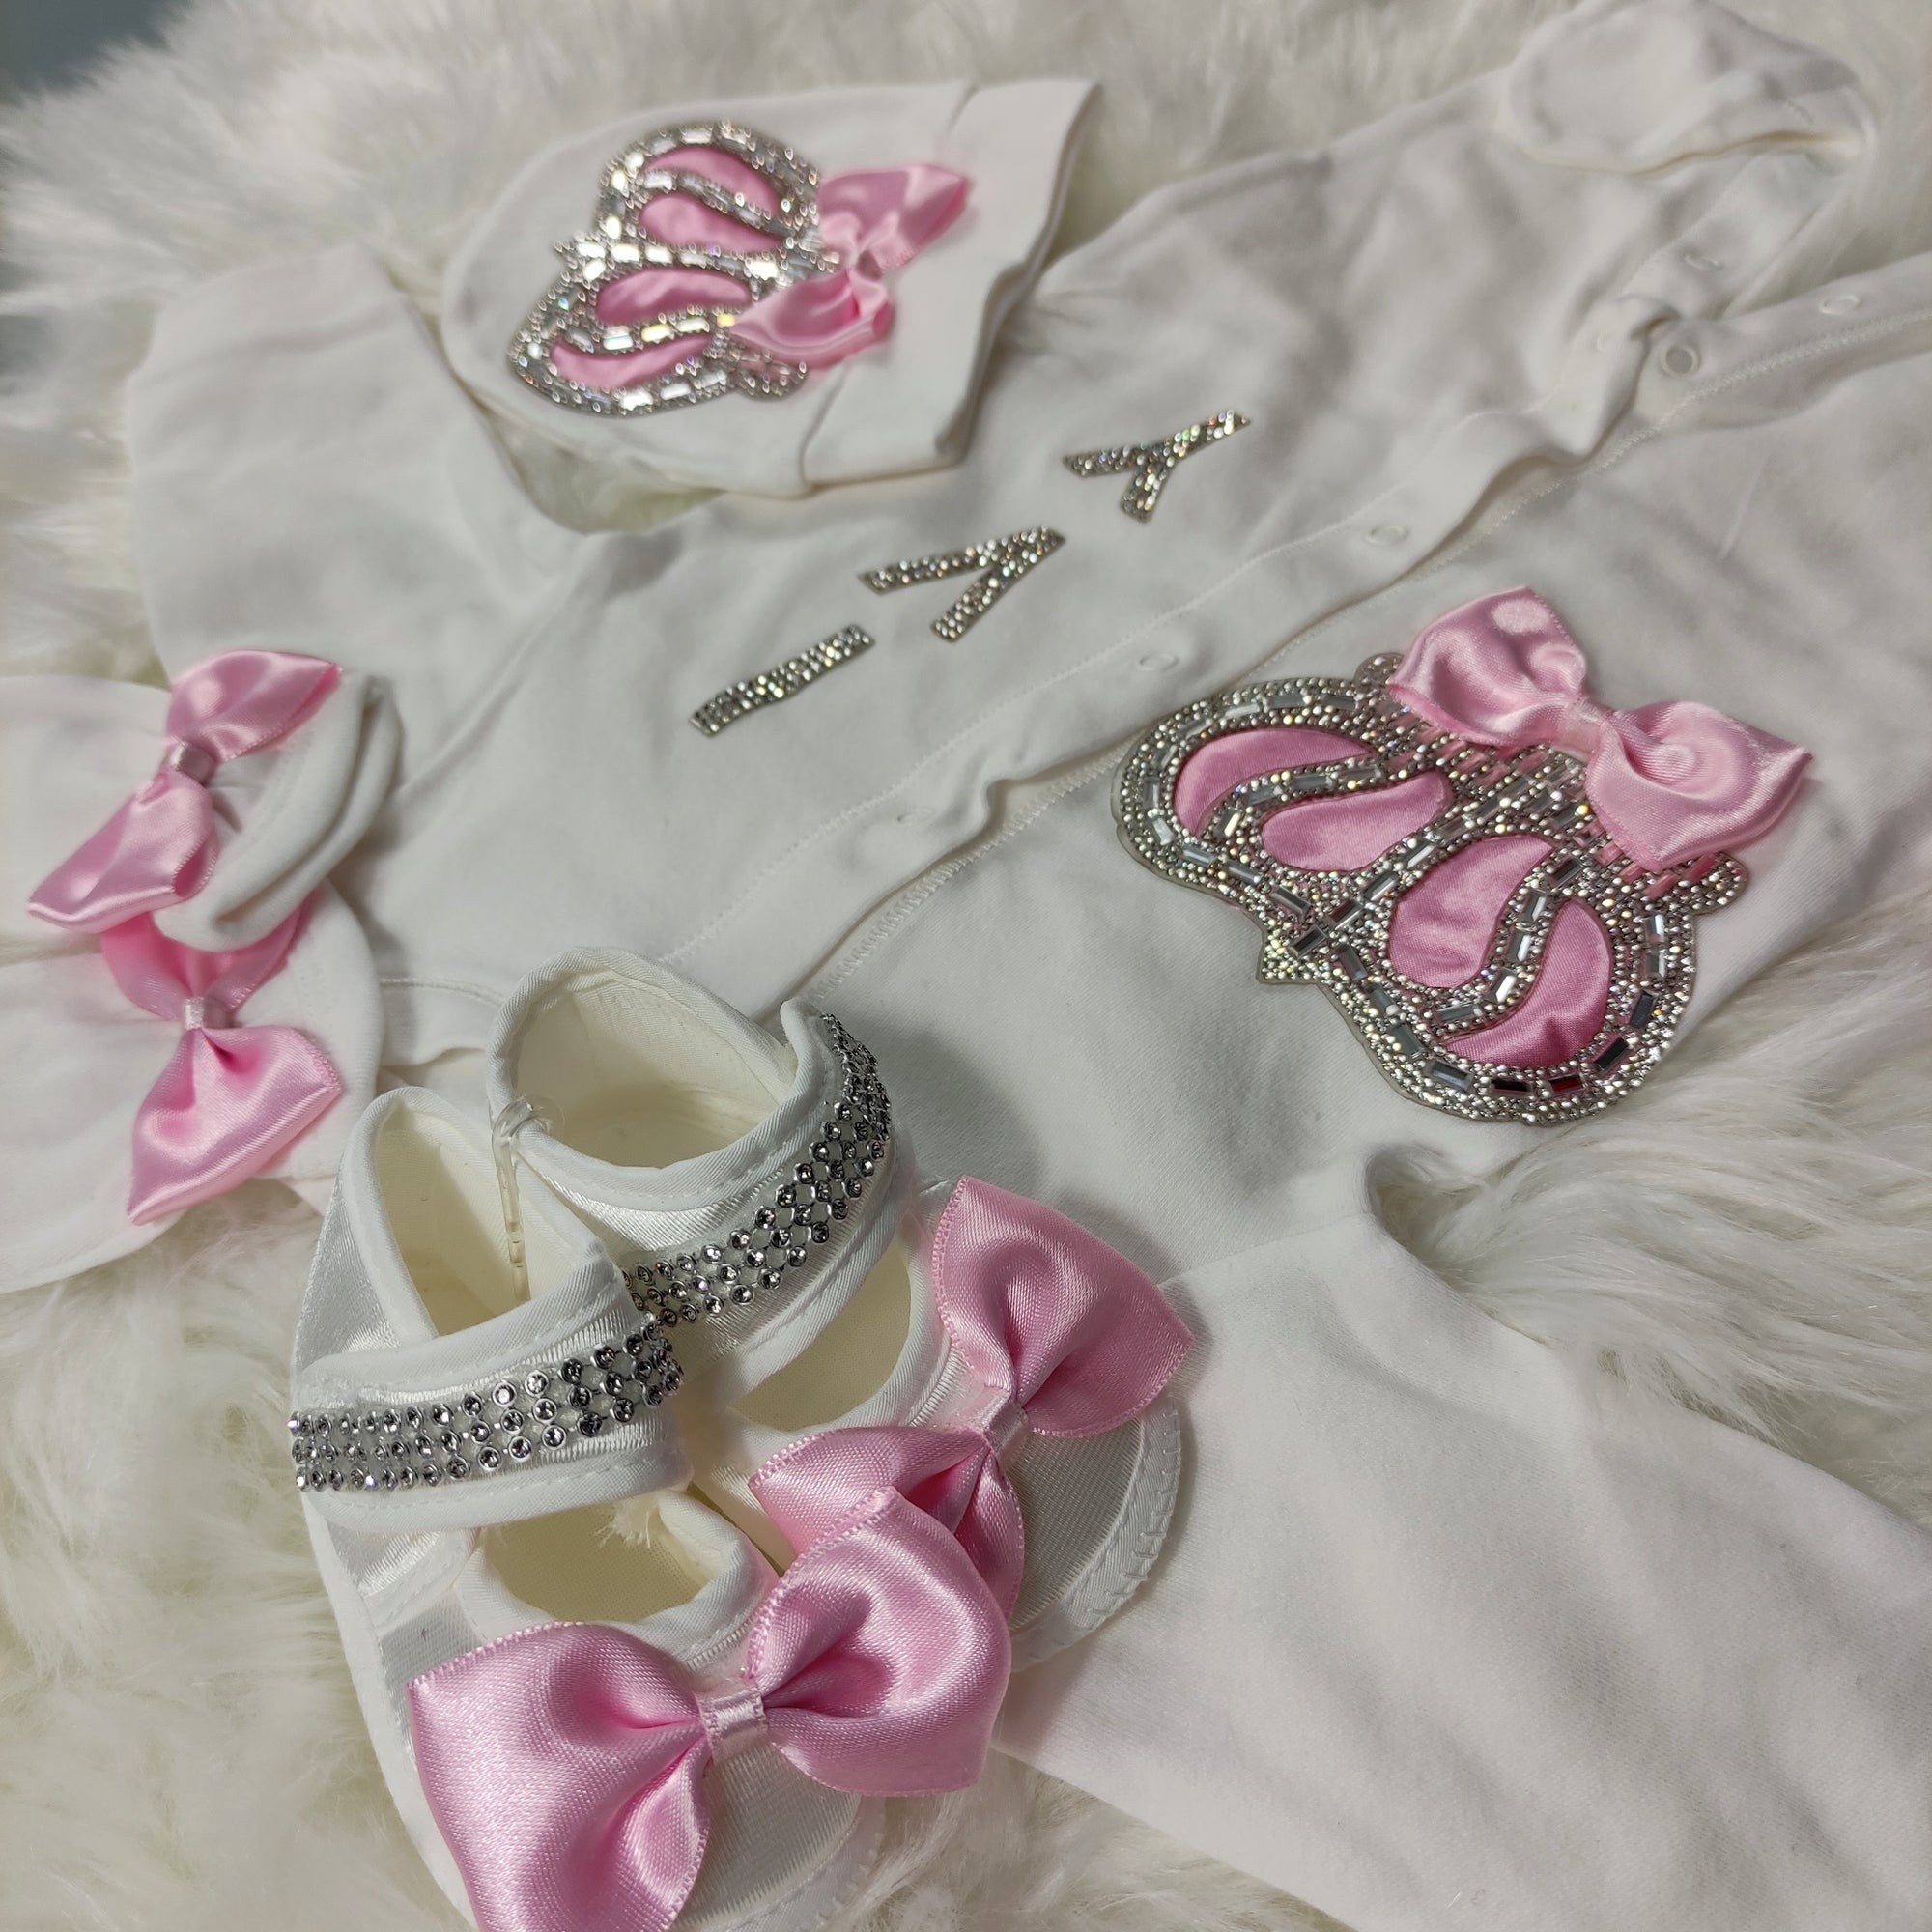 CUSTOM 4 PIECES PINK AND WHITE SET